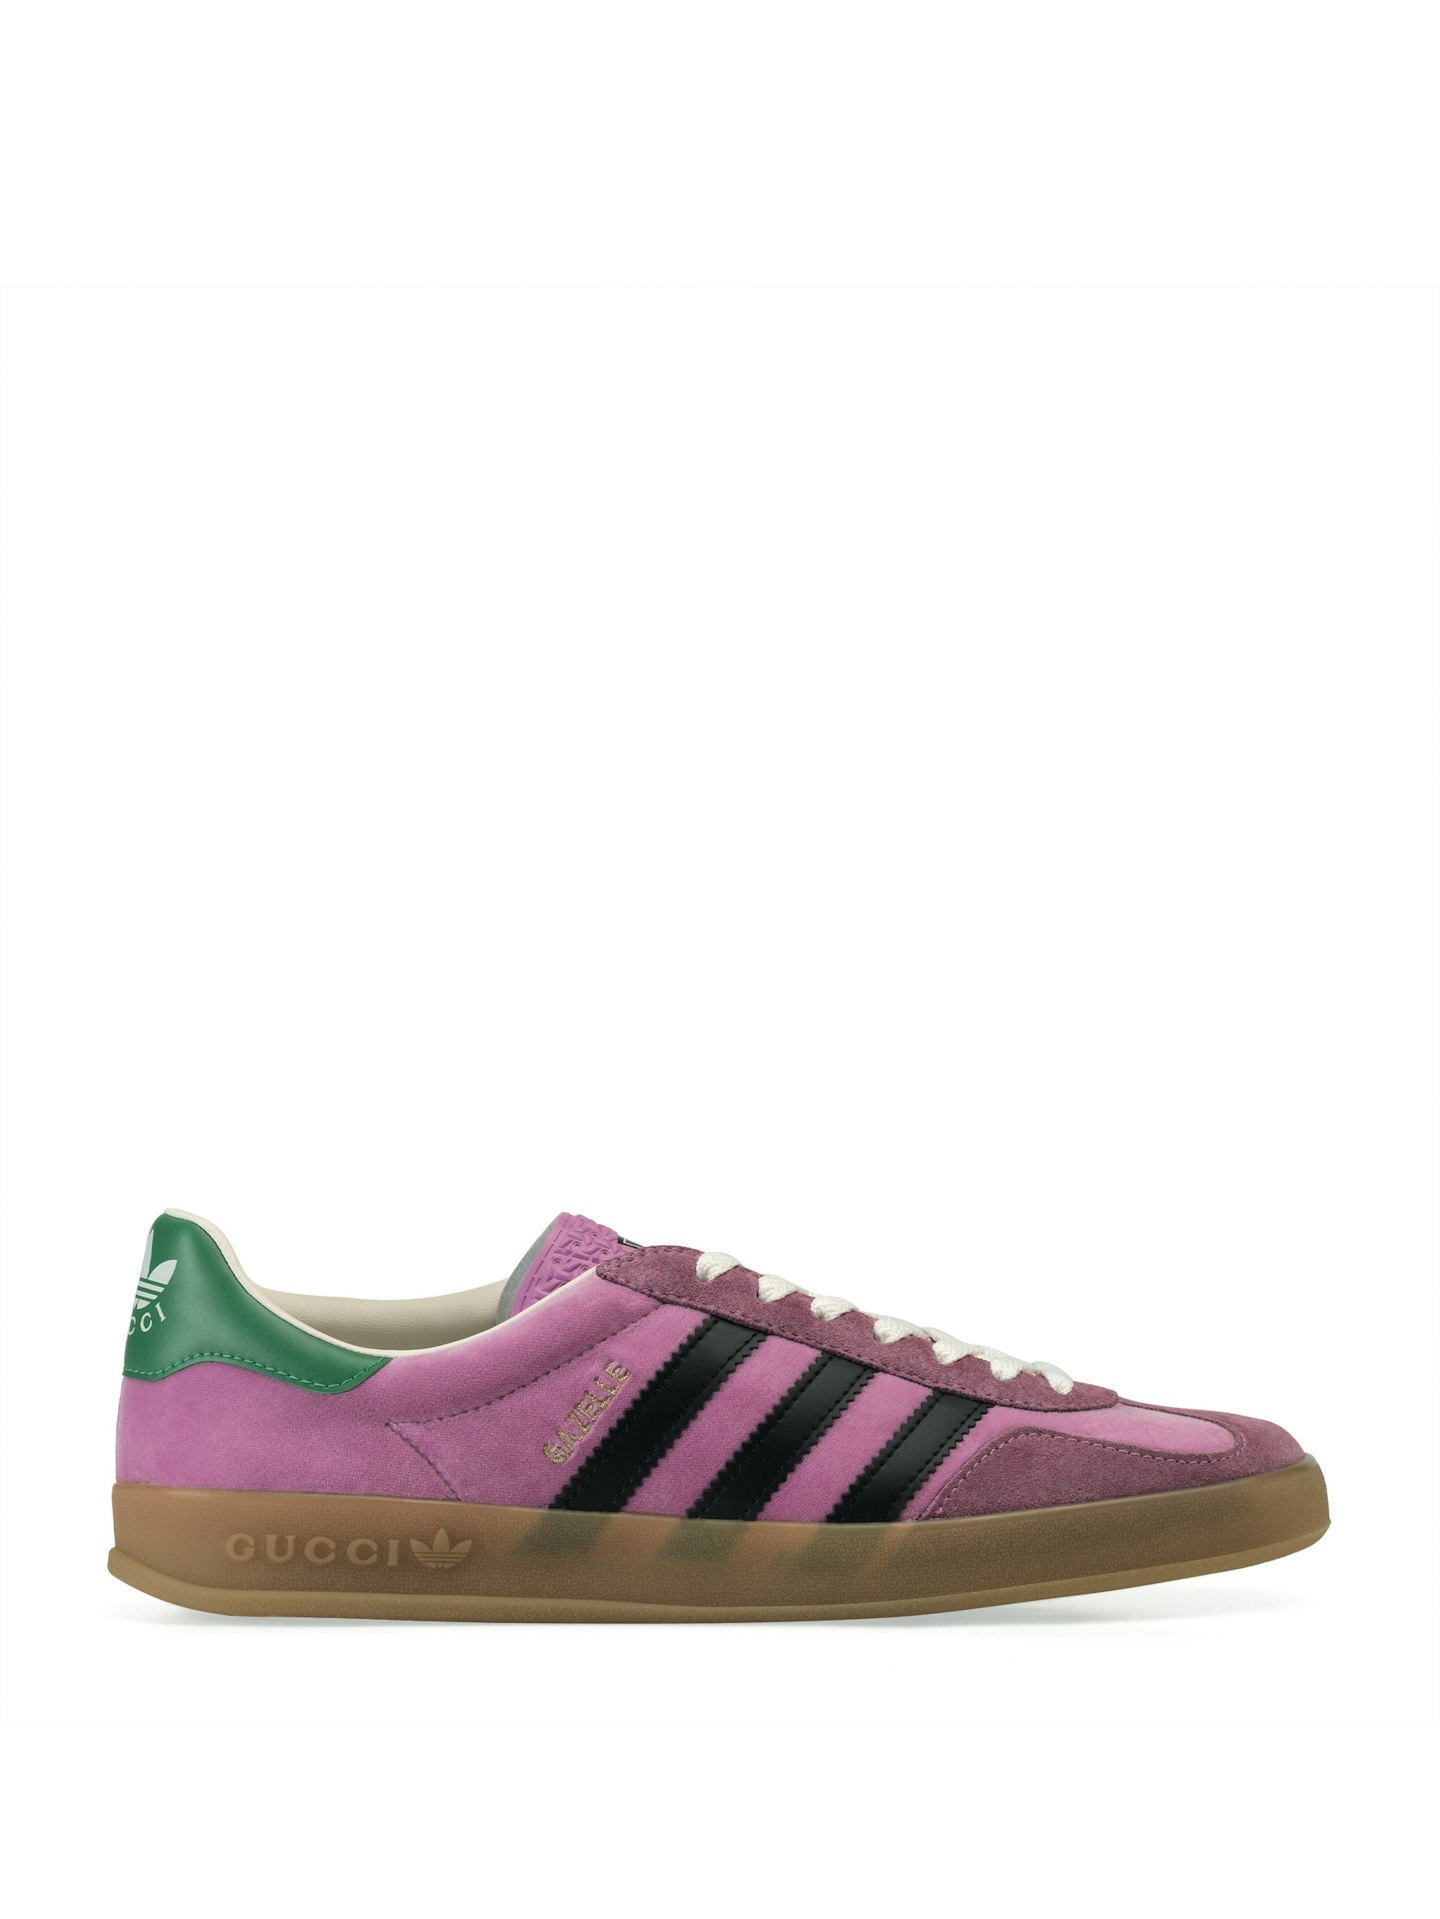 Adidas x Gucci: Details, Photos, Prices, What to Know – WWD